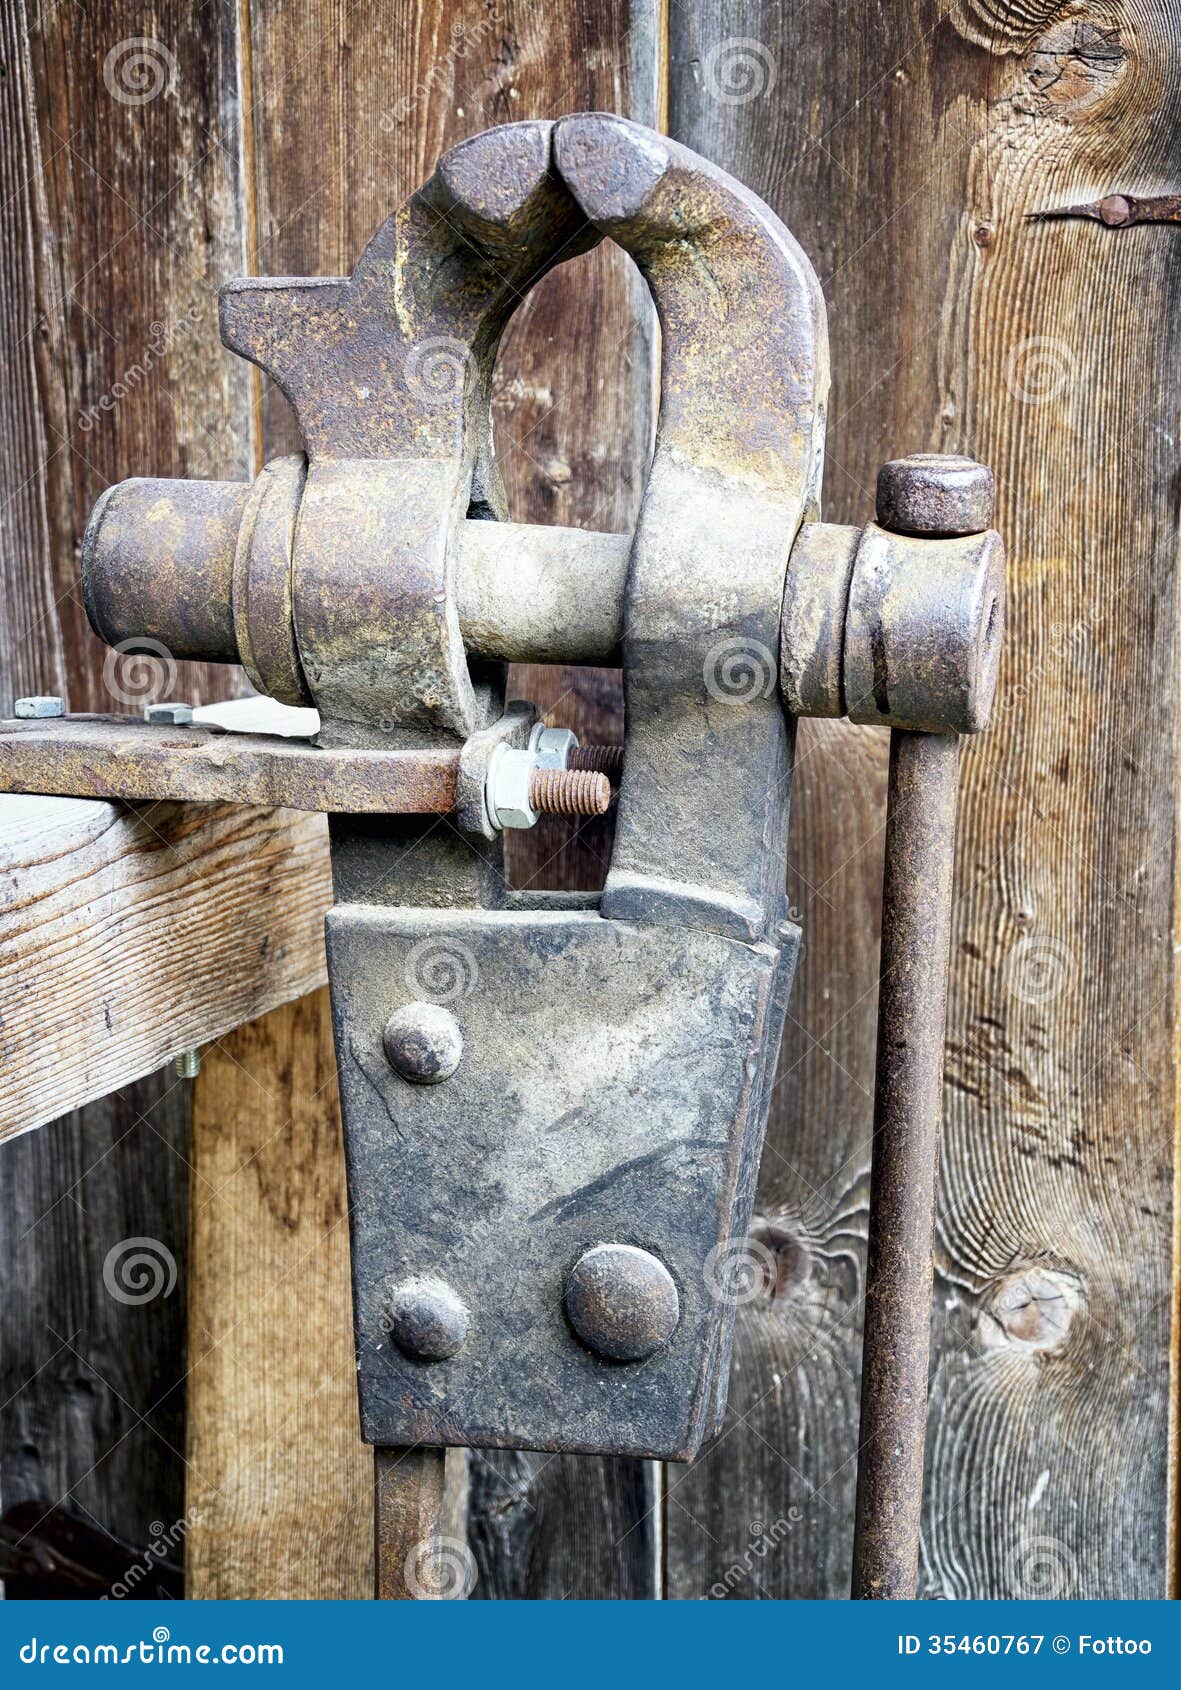 Old bench vise stock image. Image of rusty, brown, antique